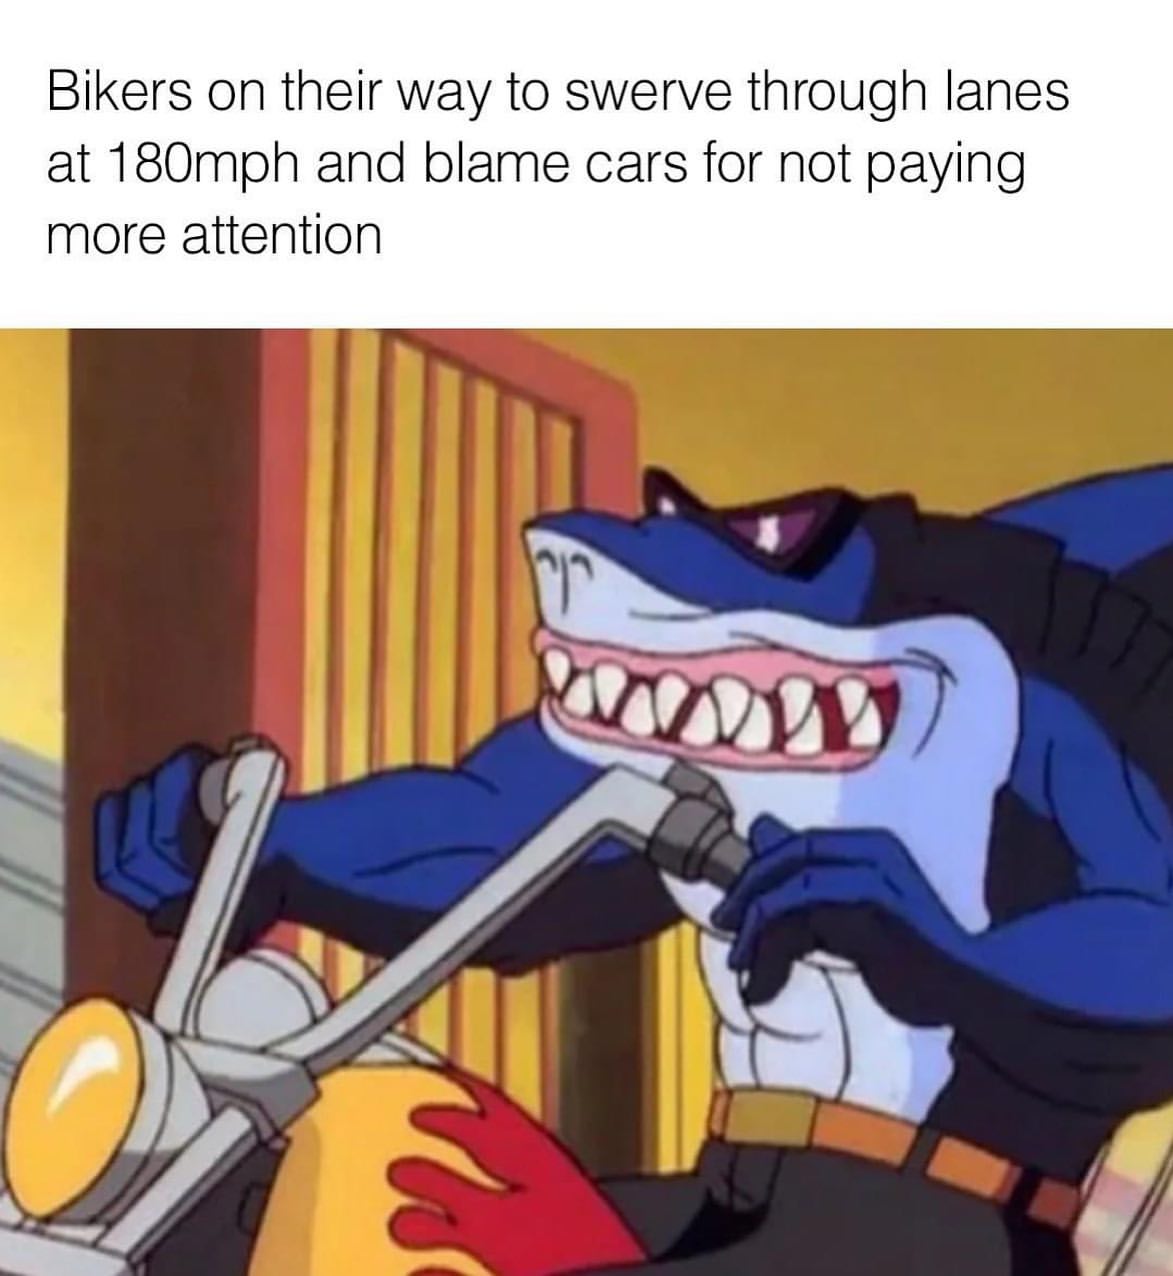 Bikers on their way to swerve through lanes at 180mph and blame cars for not paying more attention.